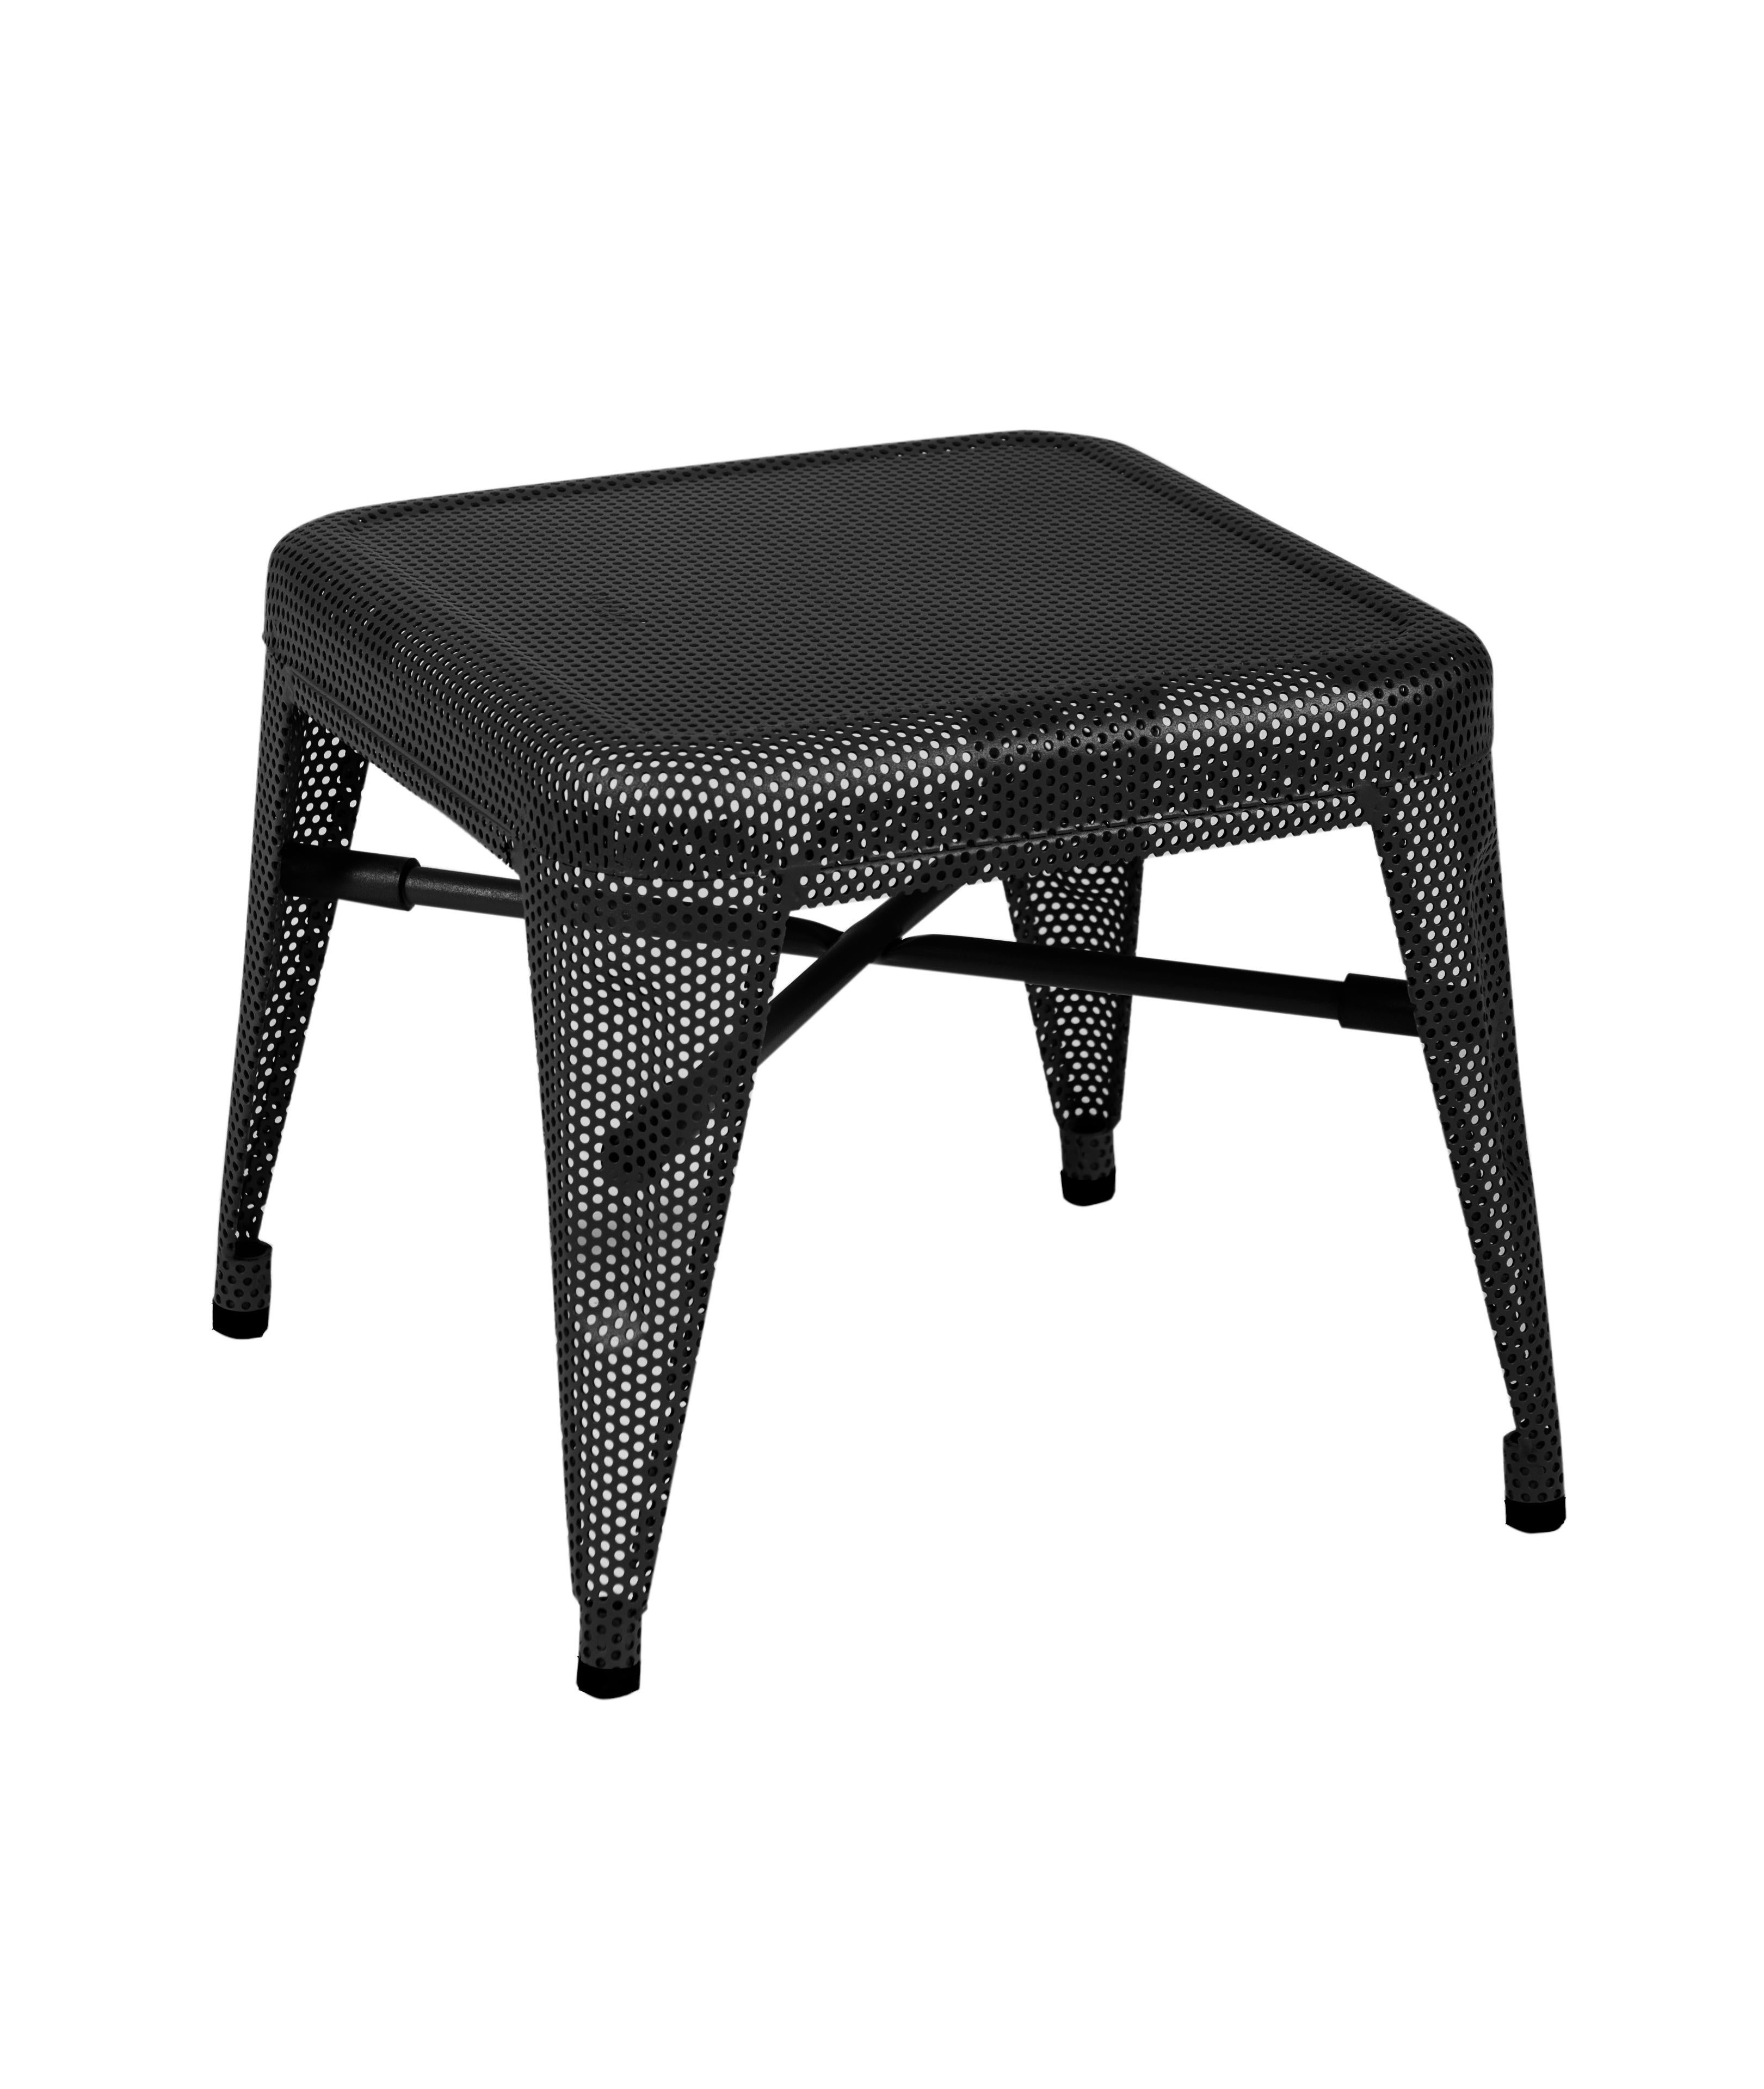 For Sale: Black (Noir) H30 Indoor Perforated Steel Stool in Essential Colors by Tolix